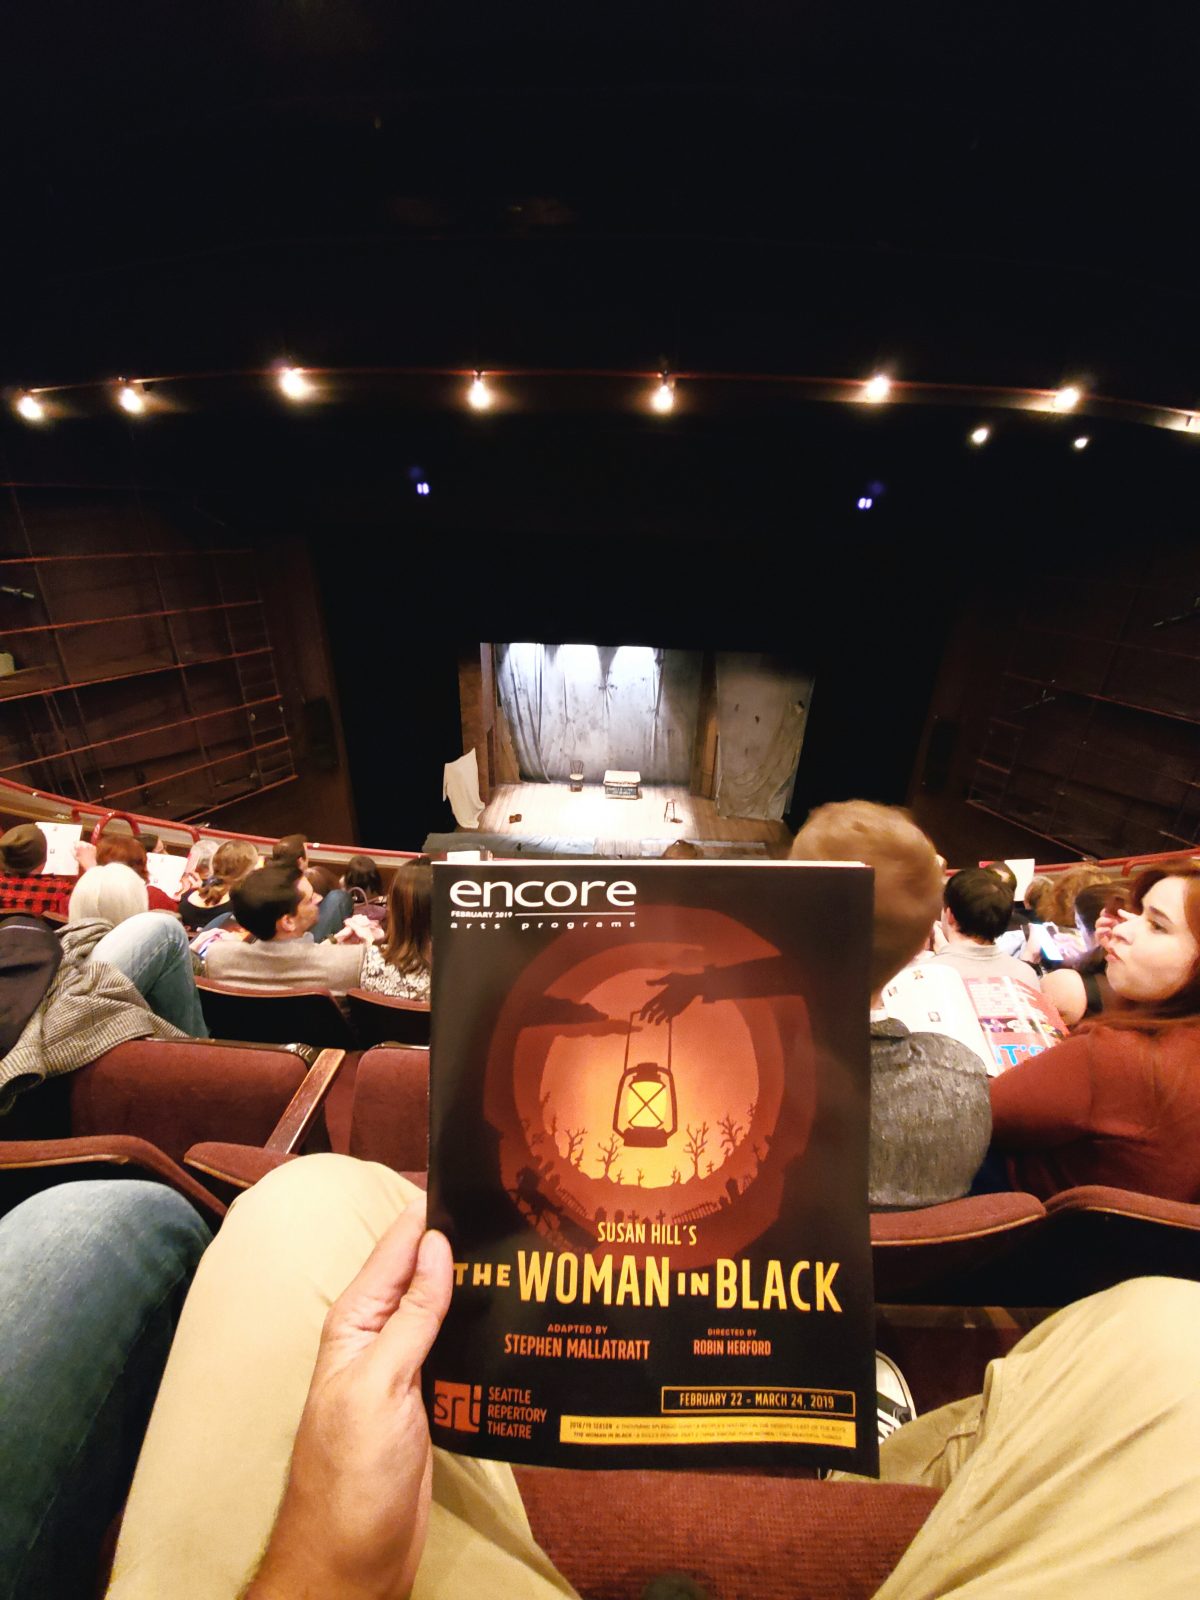 The Woman in Black Play Seattle Repertory Theatre Shows I've Seen